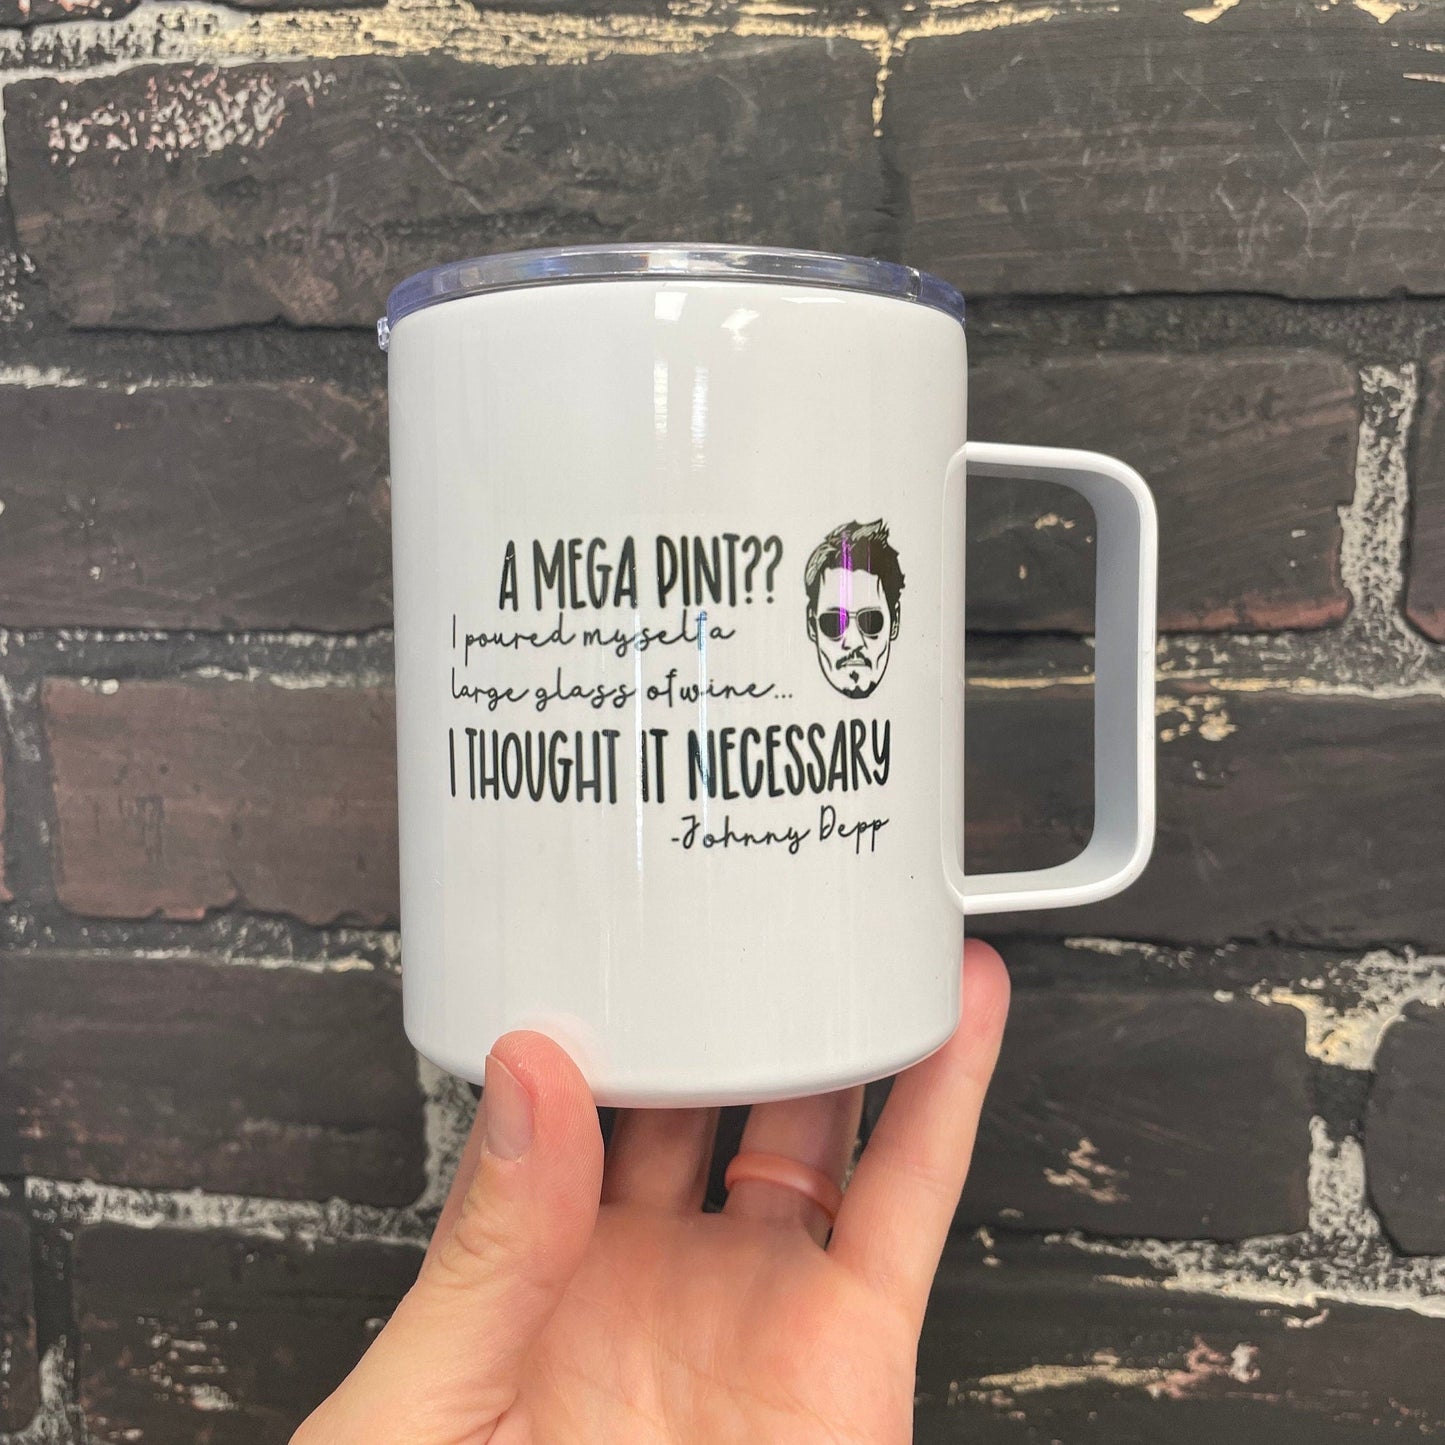 A Mega Pint, Johnny Depp quote, 10oz Camp Style Insulated Mug with Handle & Leak Proof Lid